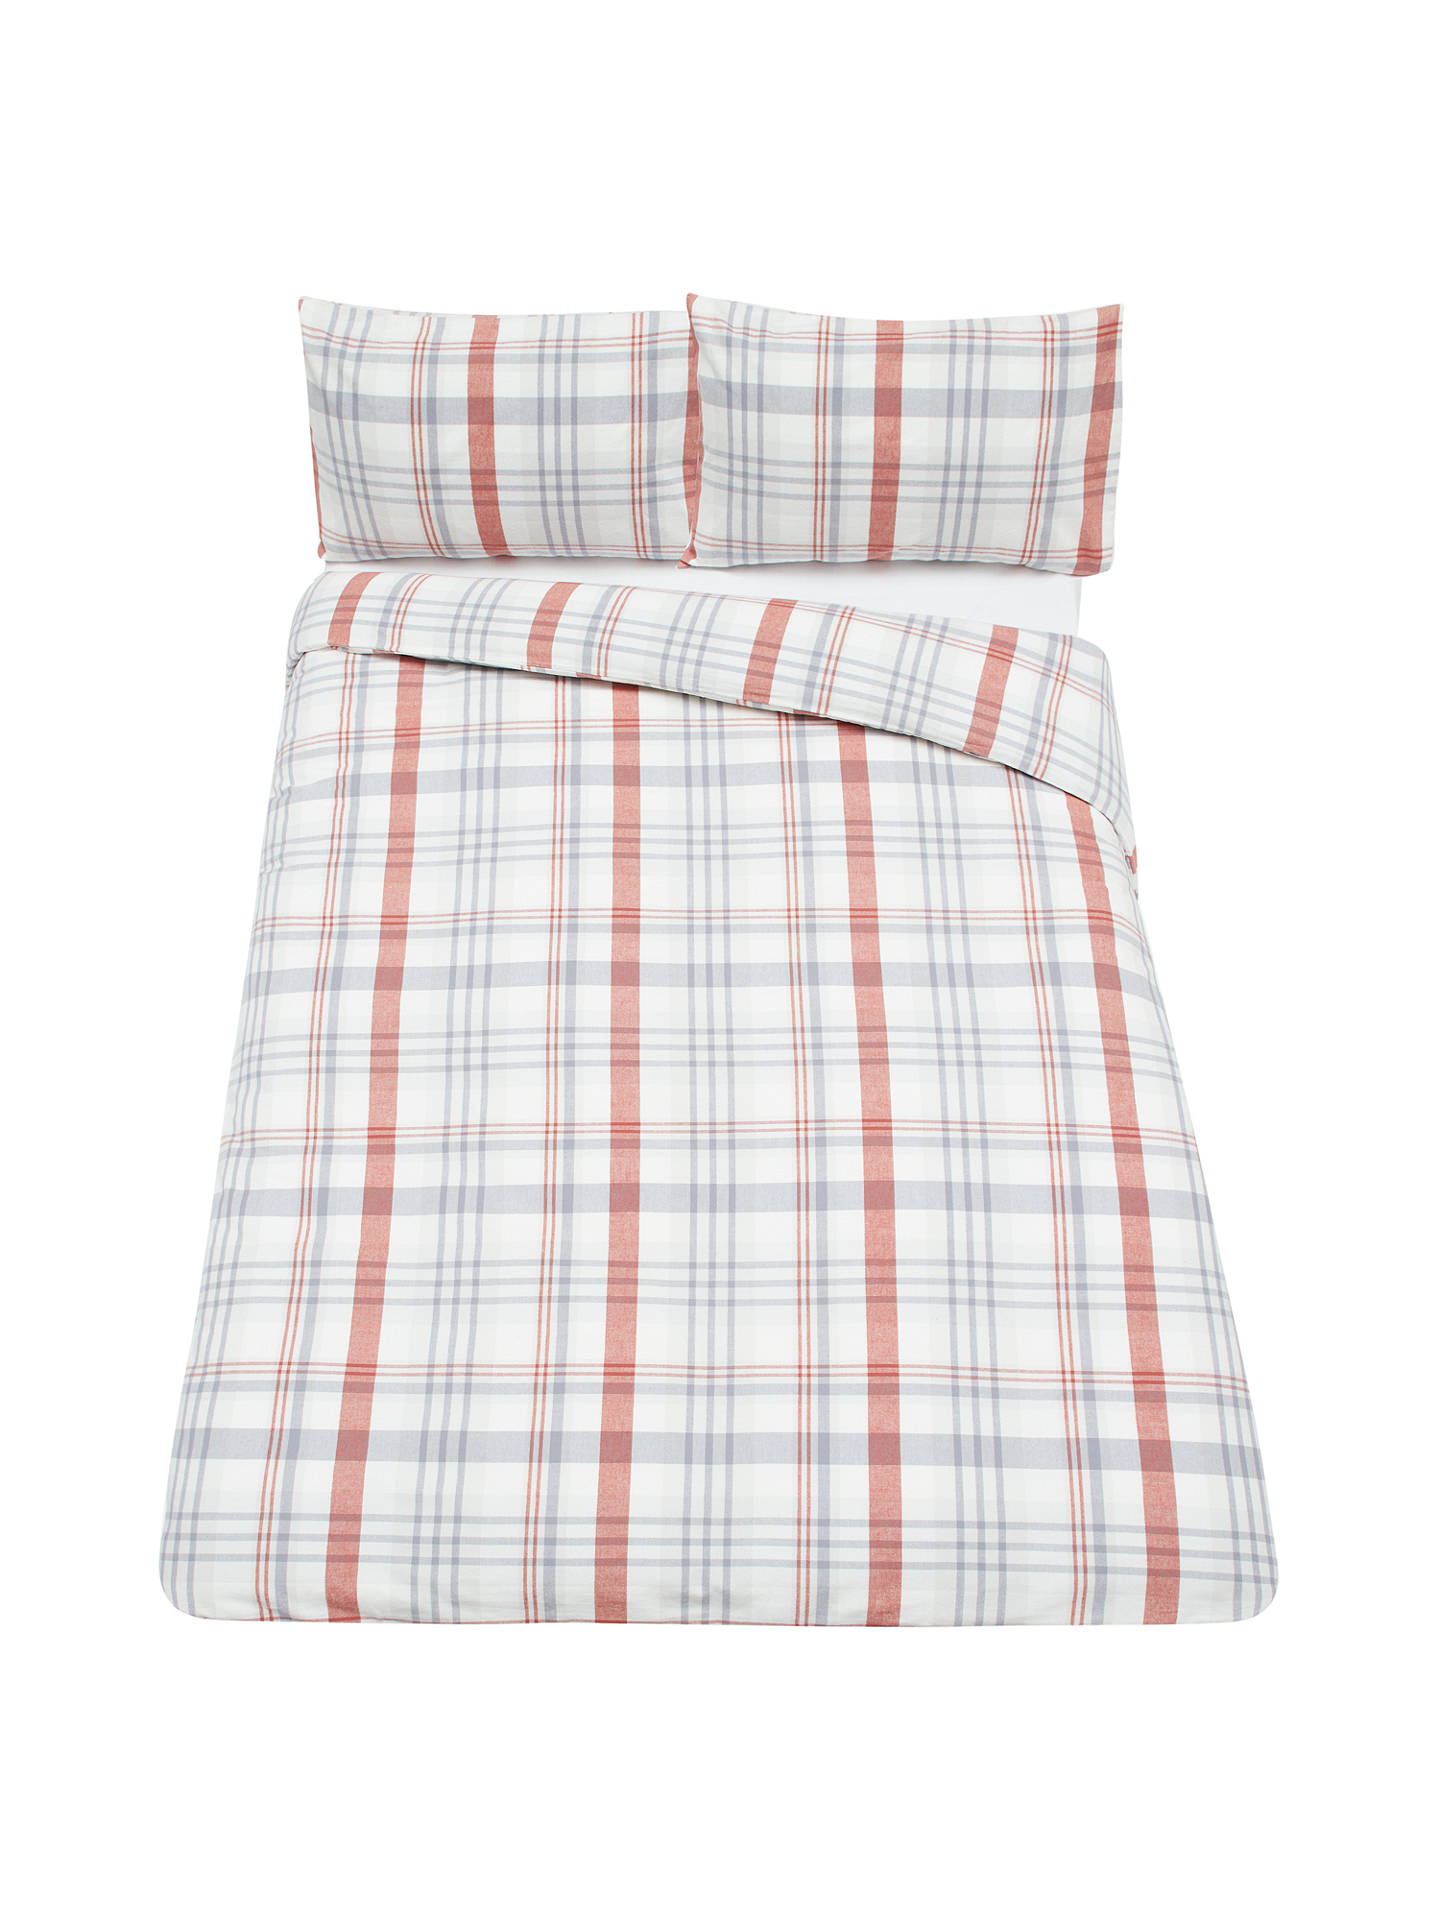 John Lewis Partners Appin Check Brushed Cotton Duvet Cover Set